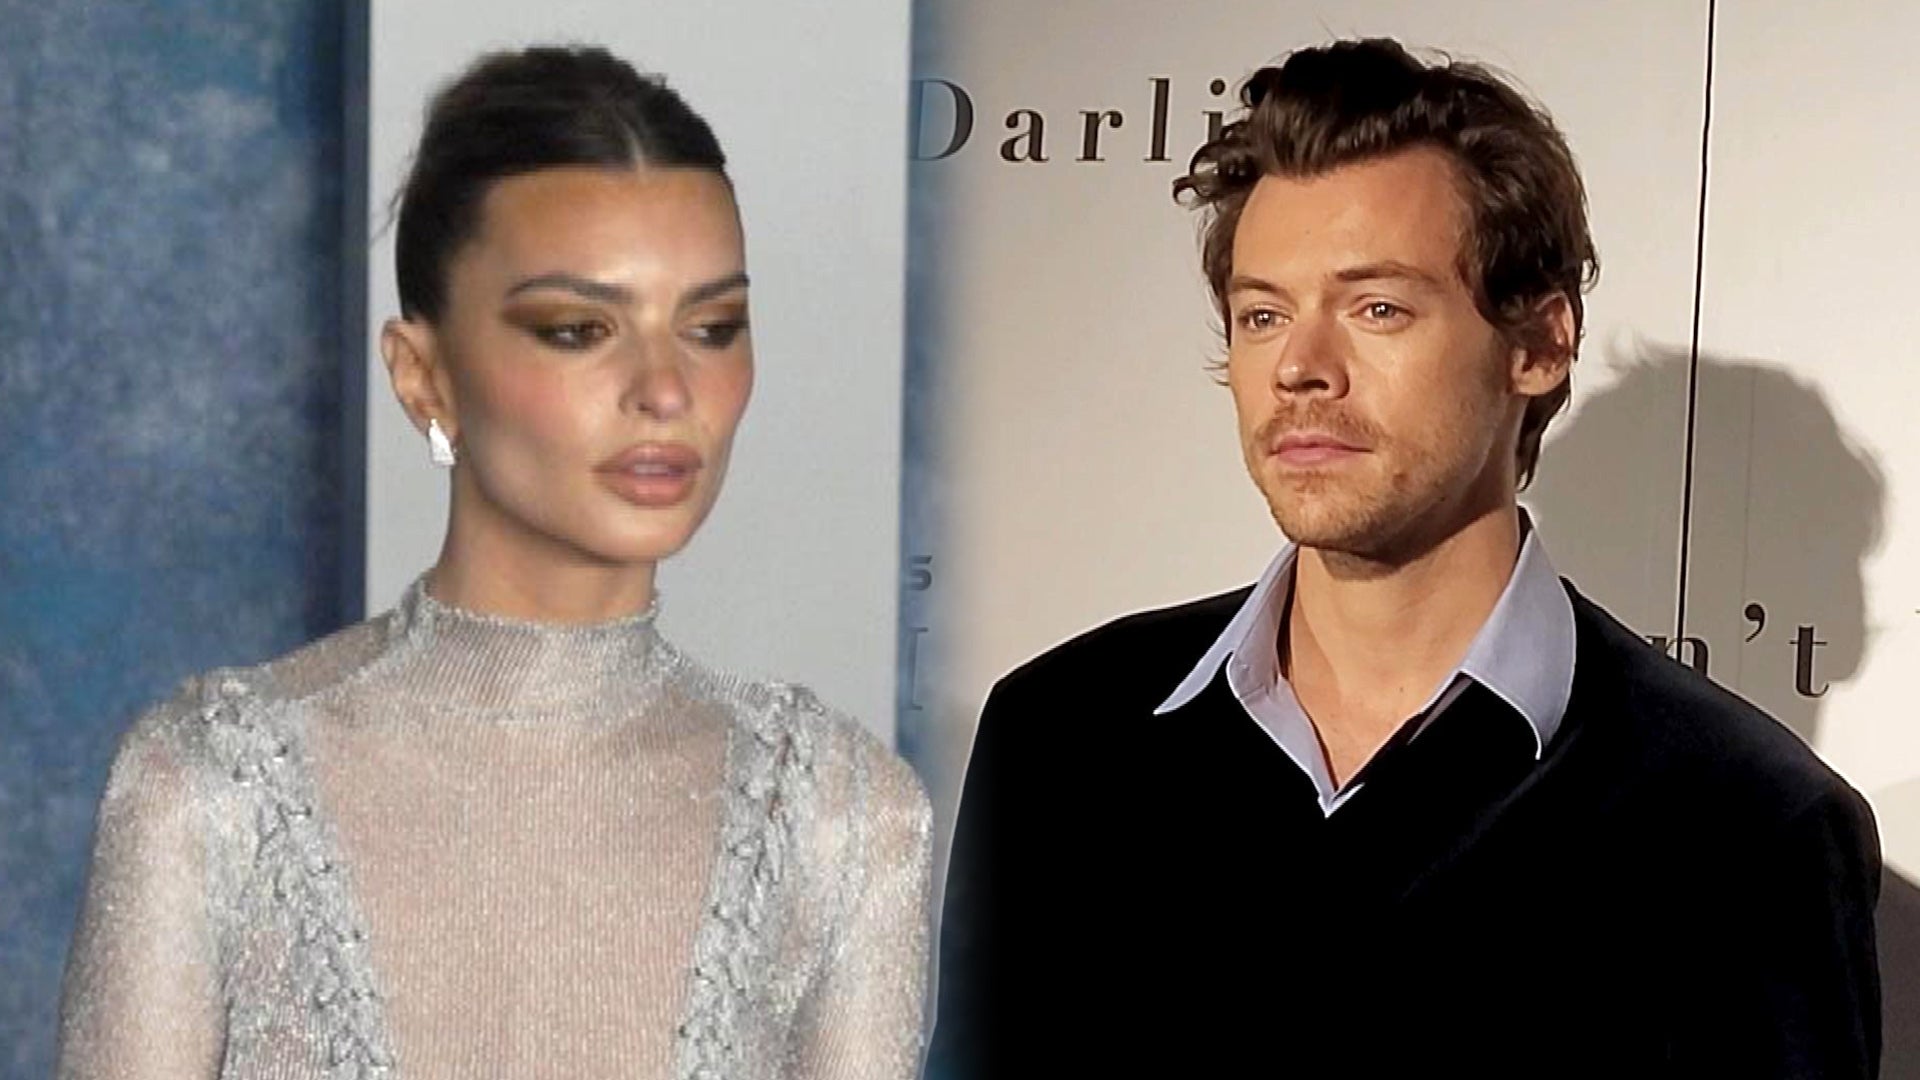 Harry Styles Called Emily Ratajkowski His Celebrity Crush in Resurfaced Interview After Tokyo Kiss